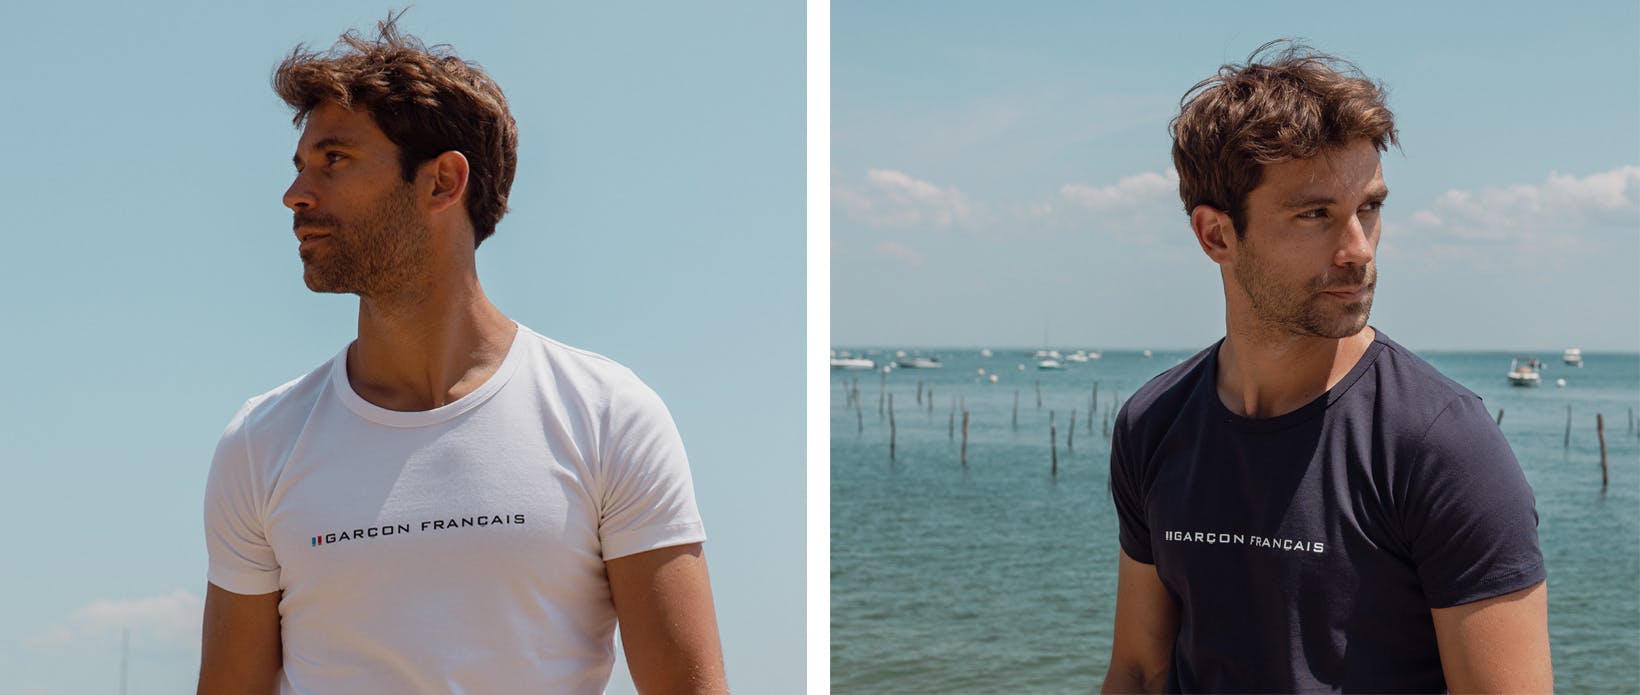 t-shirts made in France